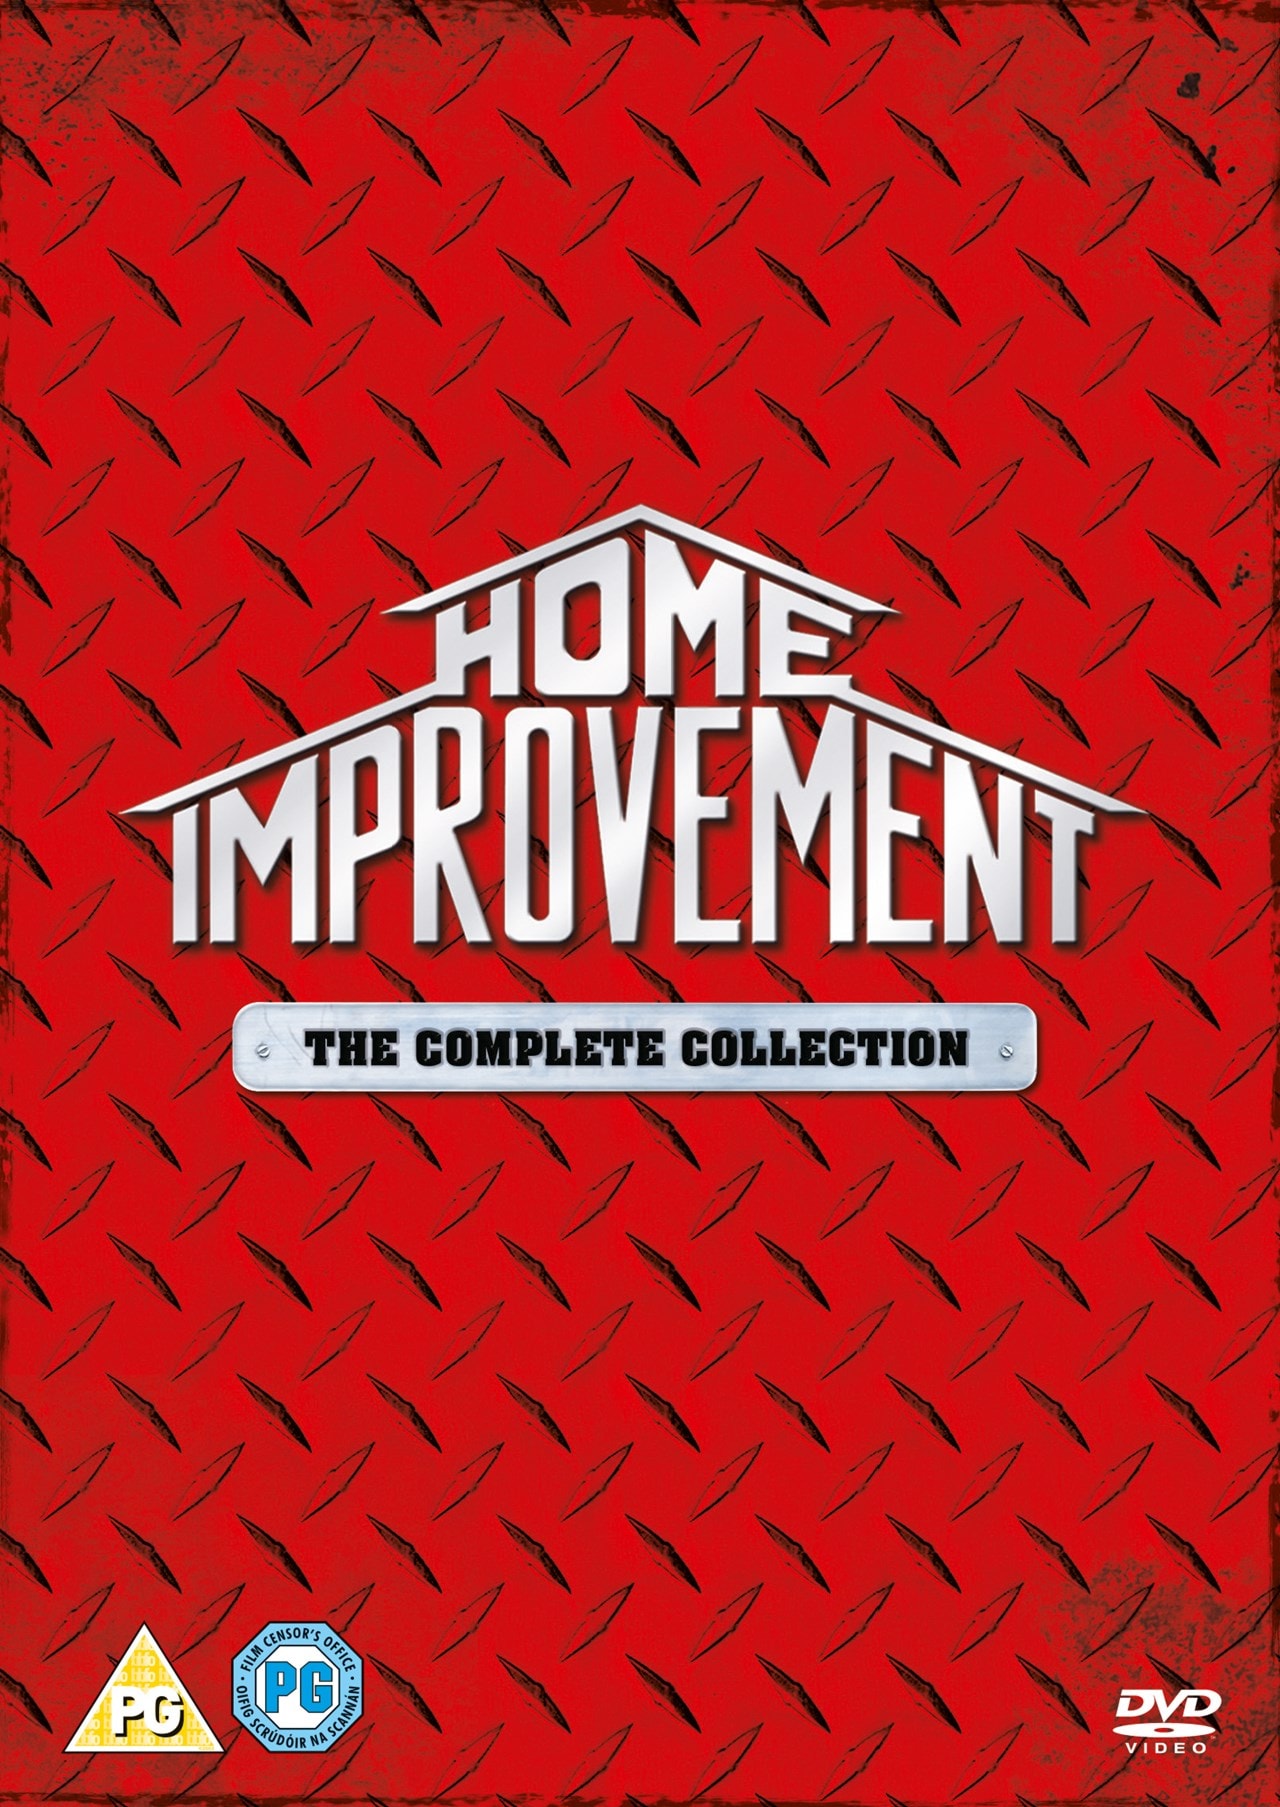 Home Improvement The Complete Collection Dvd Box Set Free Shipping